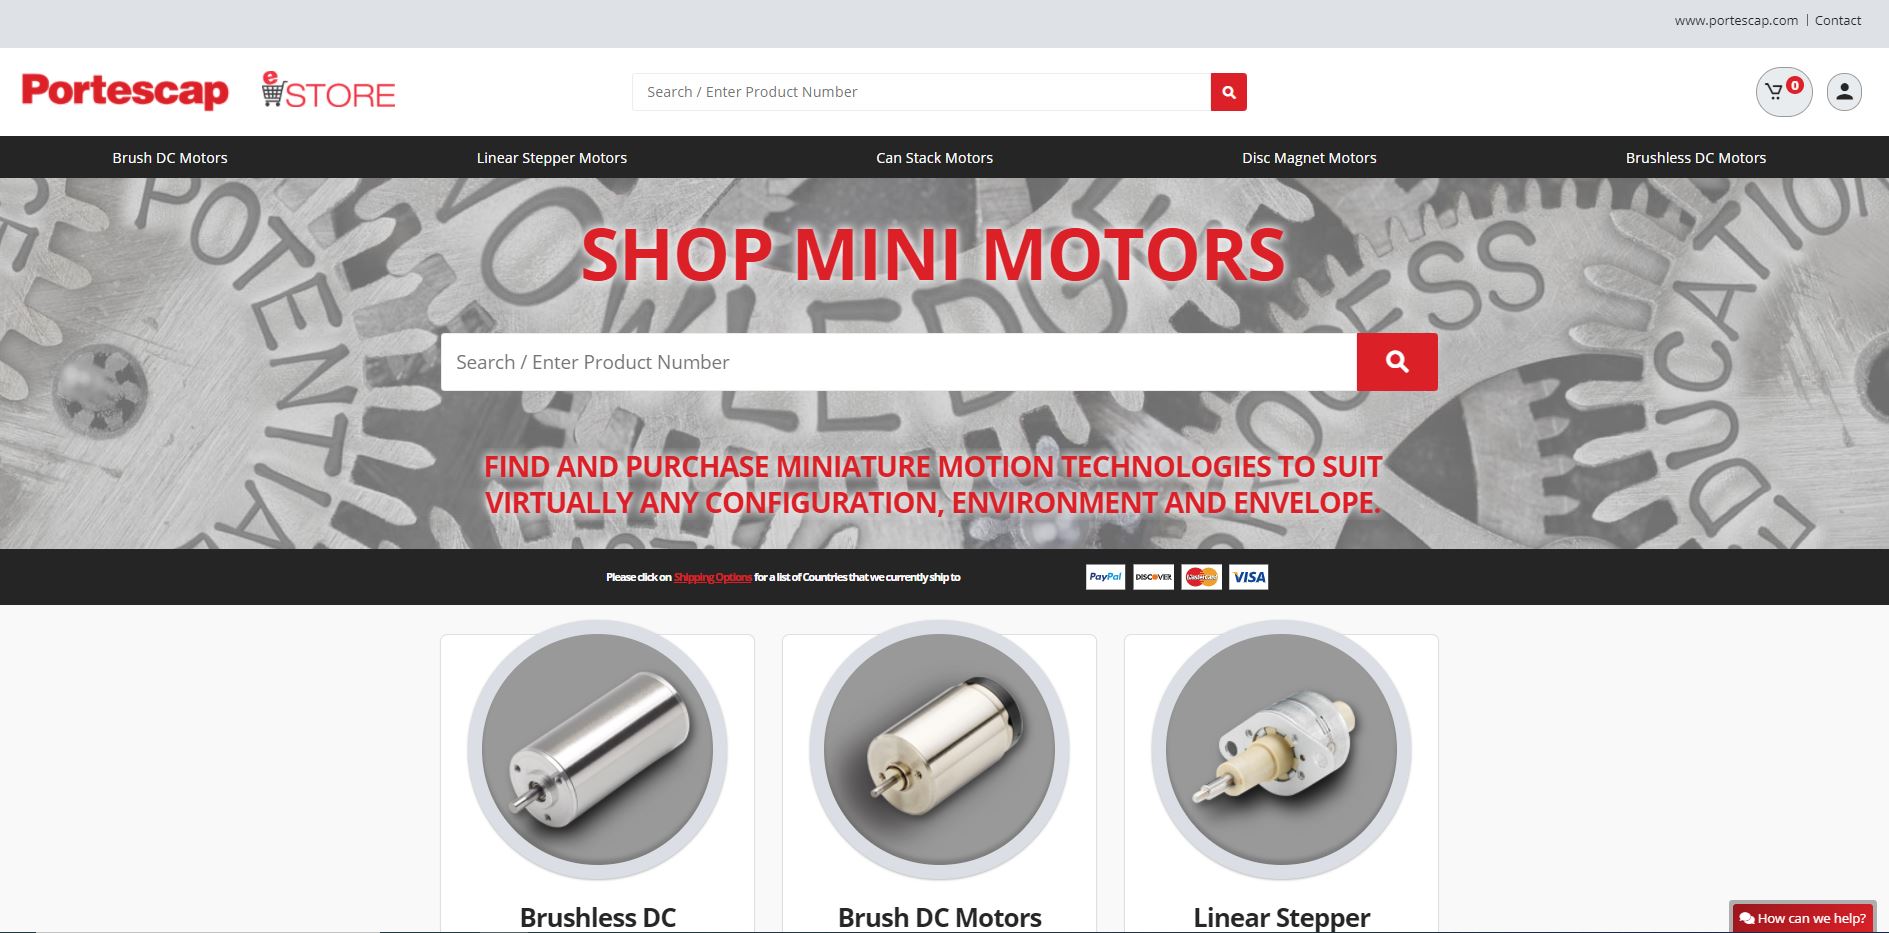 Source your miniature motor online at the Portescap e-store